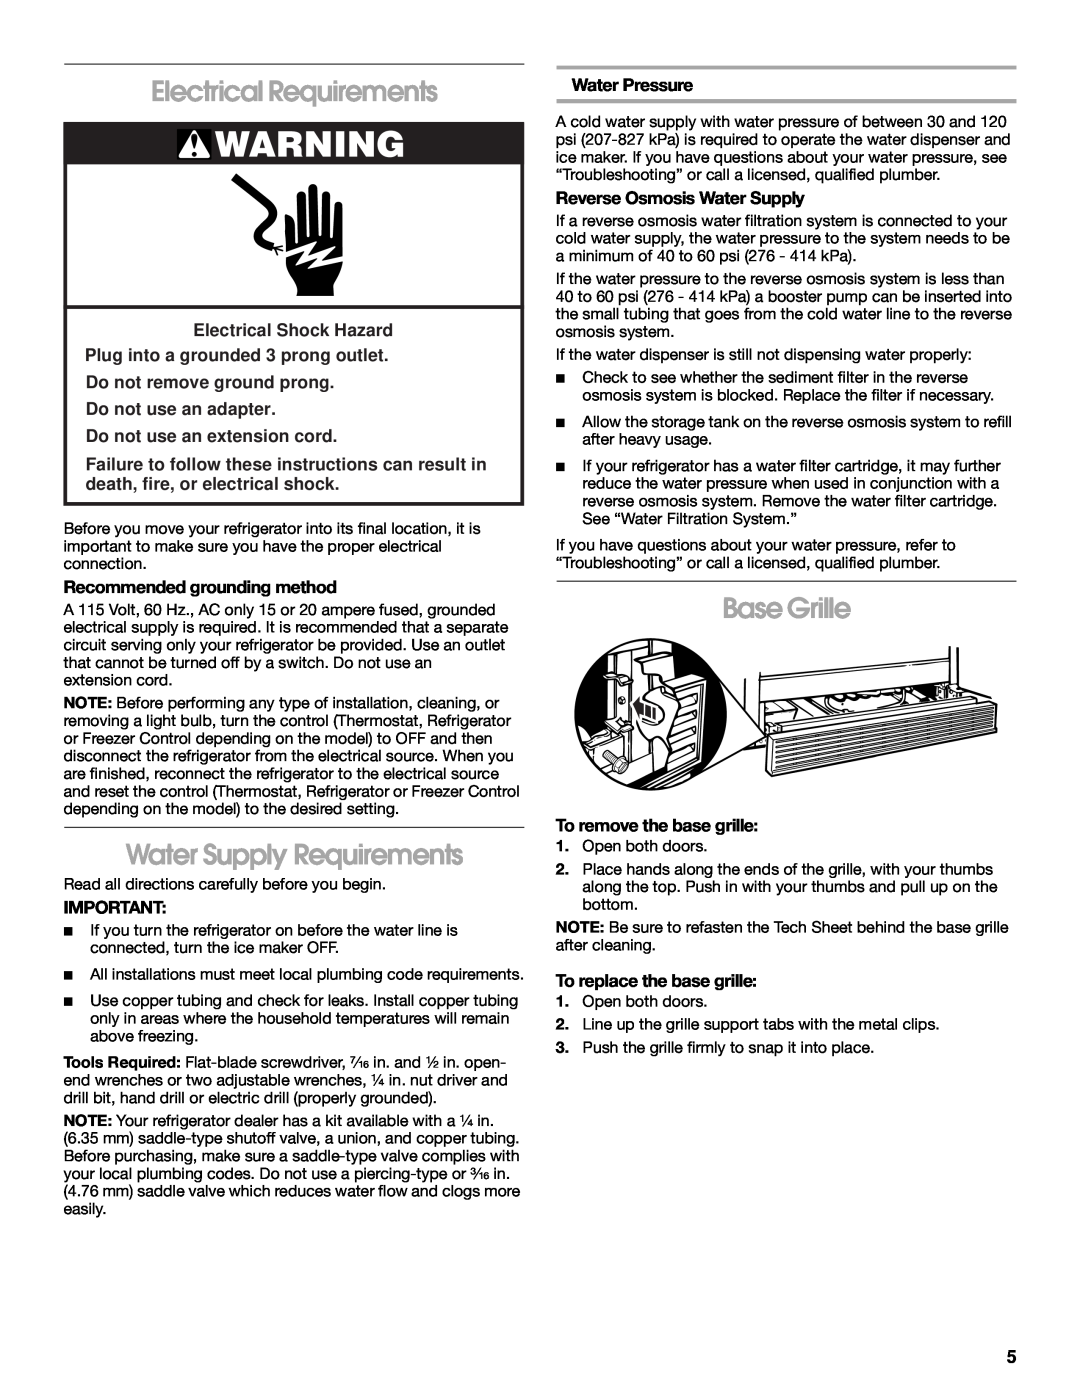 Whirlpool 2188766 manual Electrical Requirements, Water Supply Requirements, Base Grille, Do not use an extension cord 